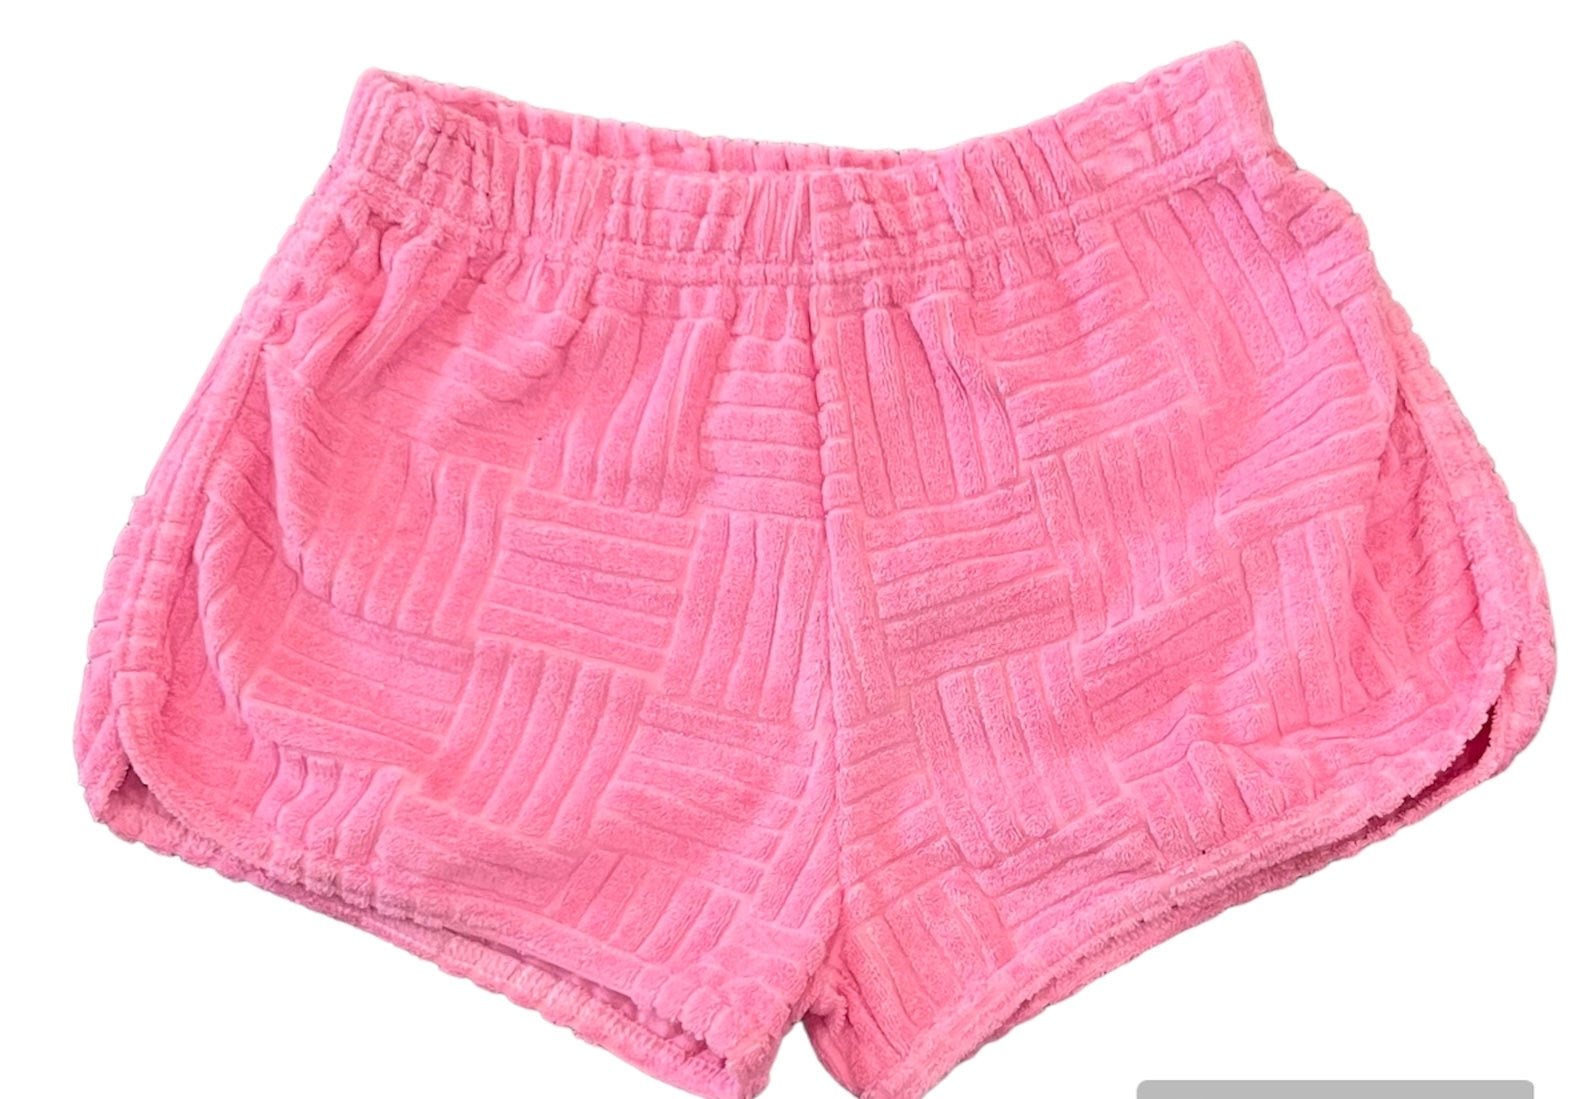 Flowers by Zoe - 4-6x Textured Terry Cloth Shorts - Pink